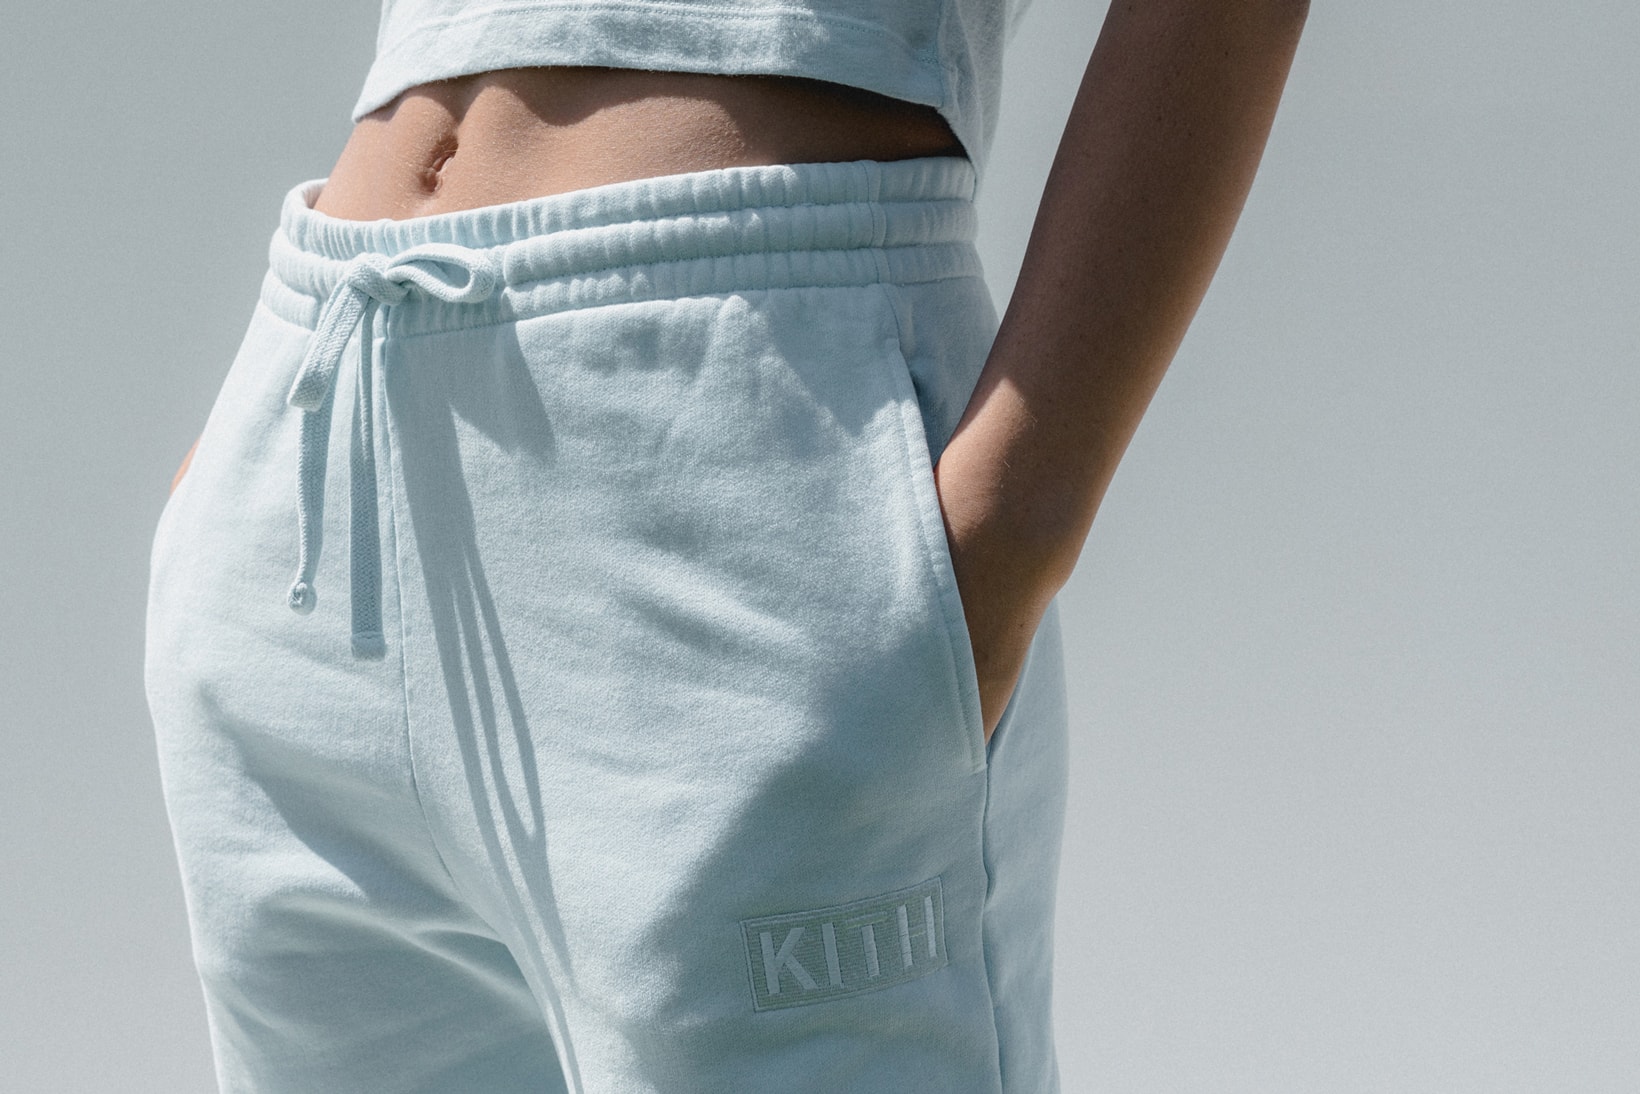 Kith Women Spring 2018 Classics Collection Wooster Sweatpants Baby Blue